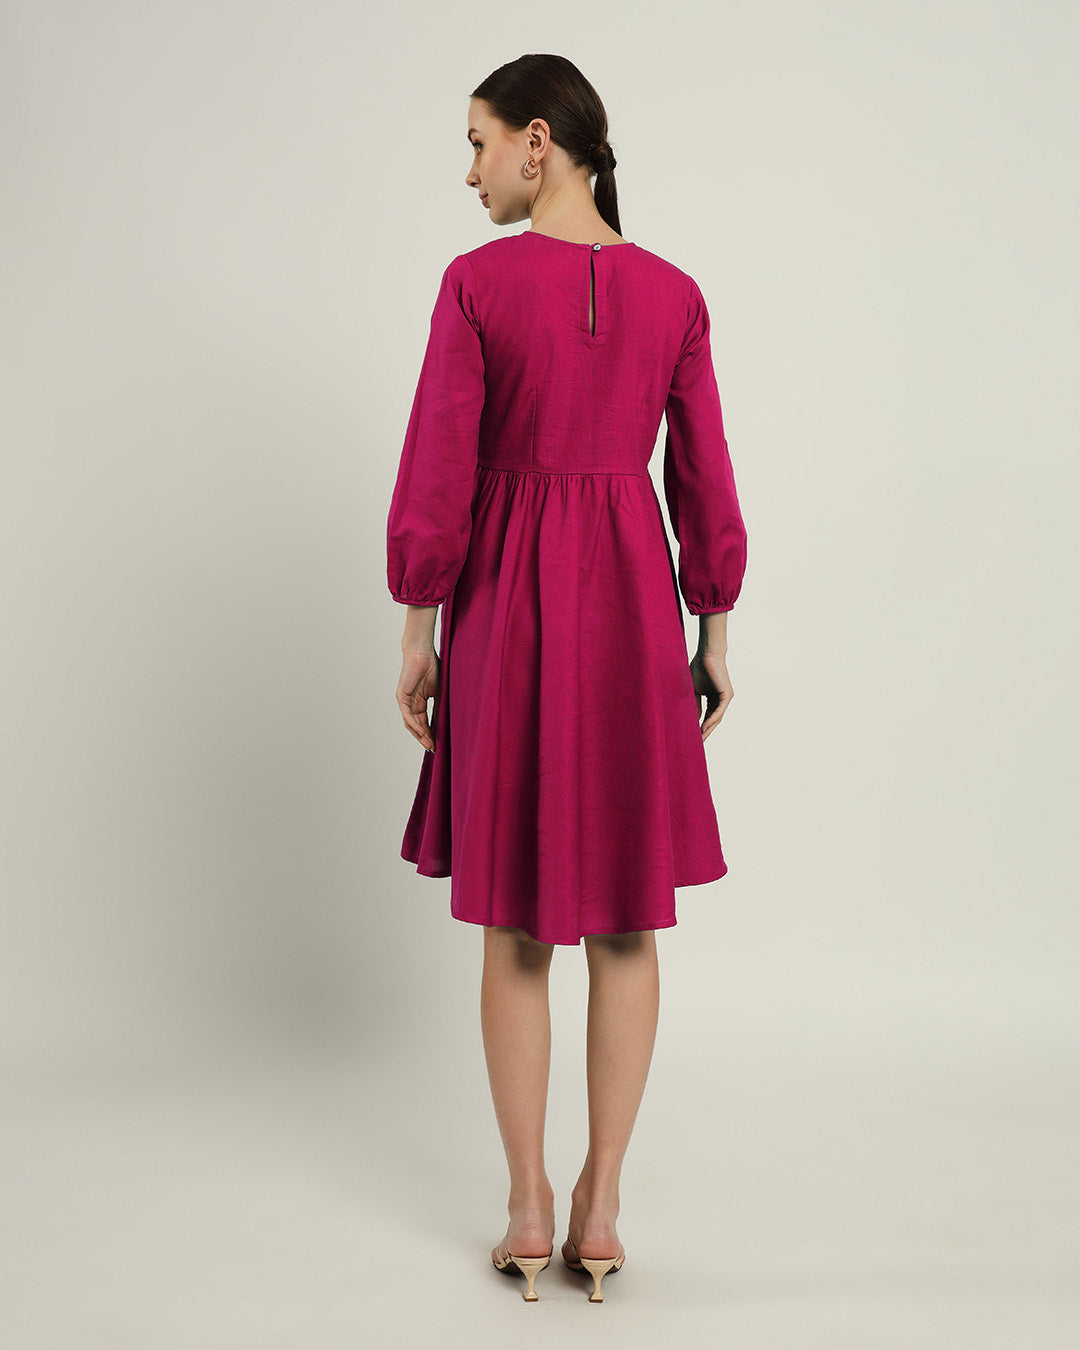 The Exeter Berry Dress